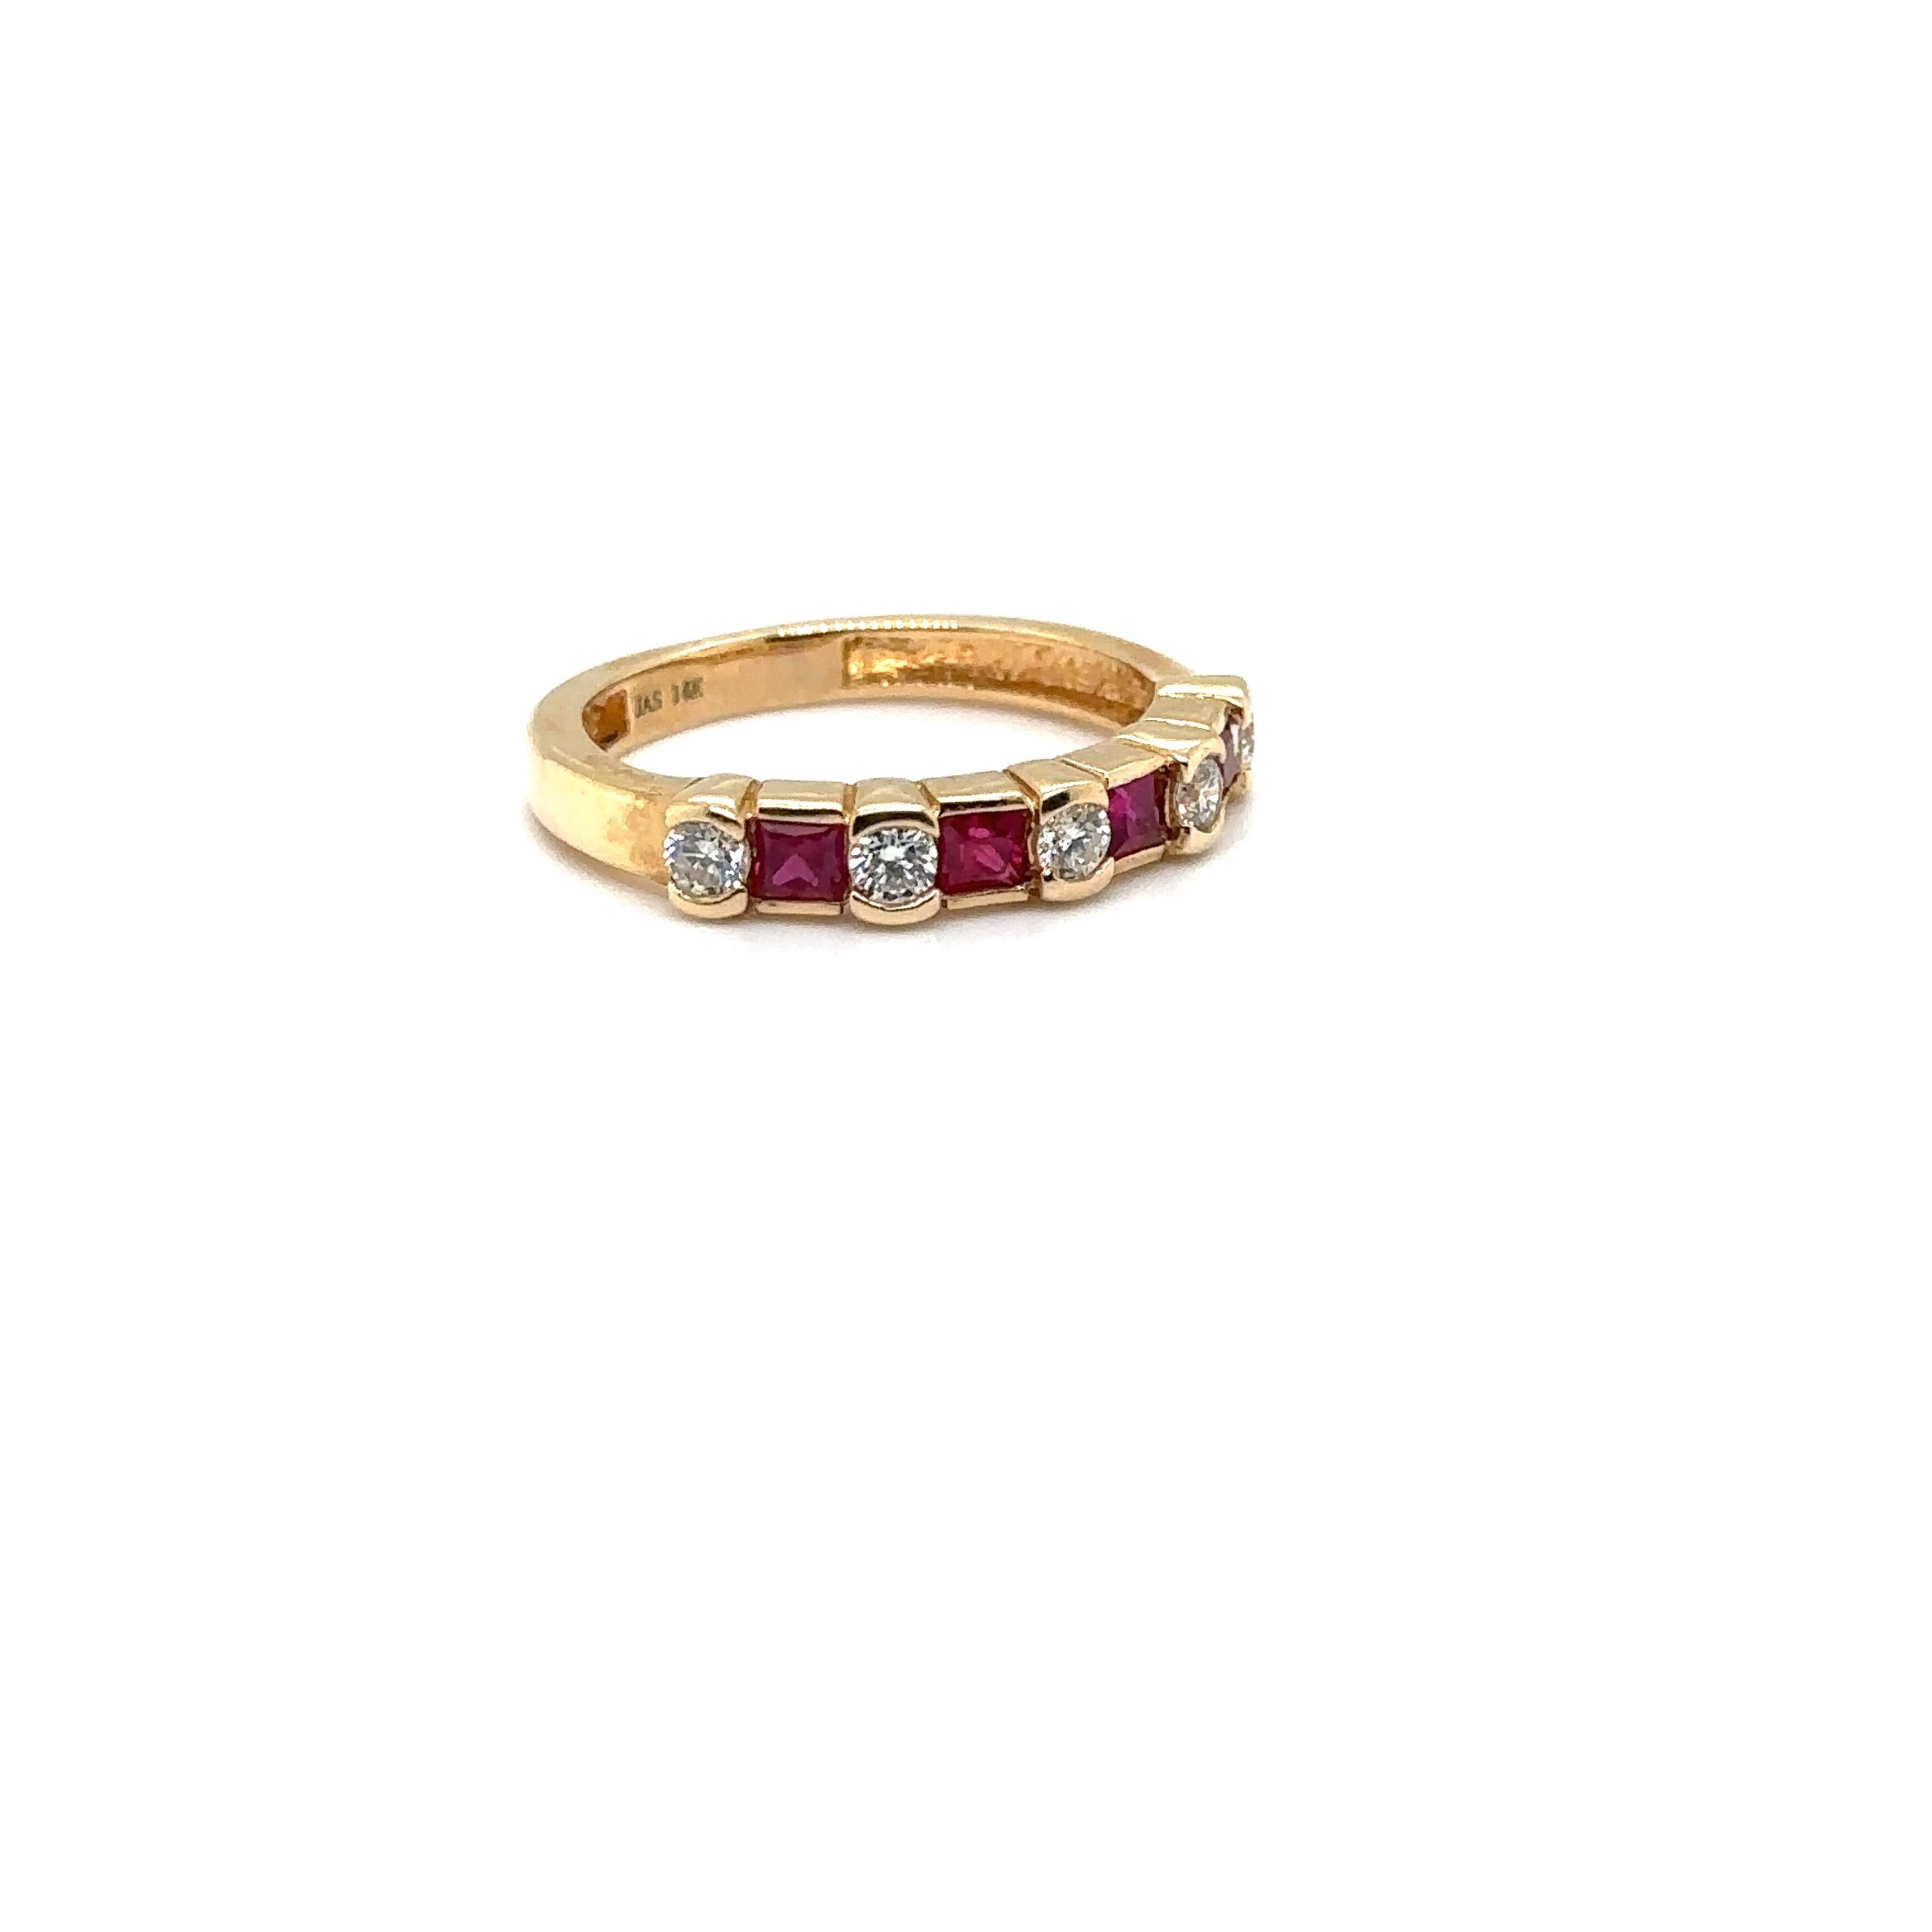 JAS-21-2221 - 14K YELLOW GOLD 0.35Ct GH-SI1 DIAS AND 0.40CT PRINCESS CUT RUBIES For Sale 1